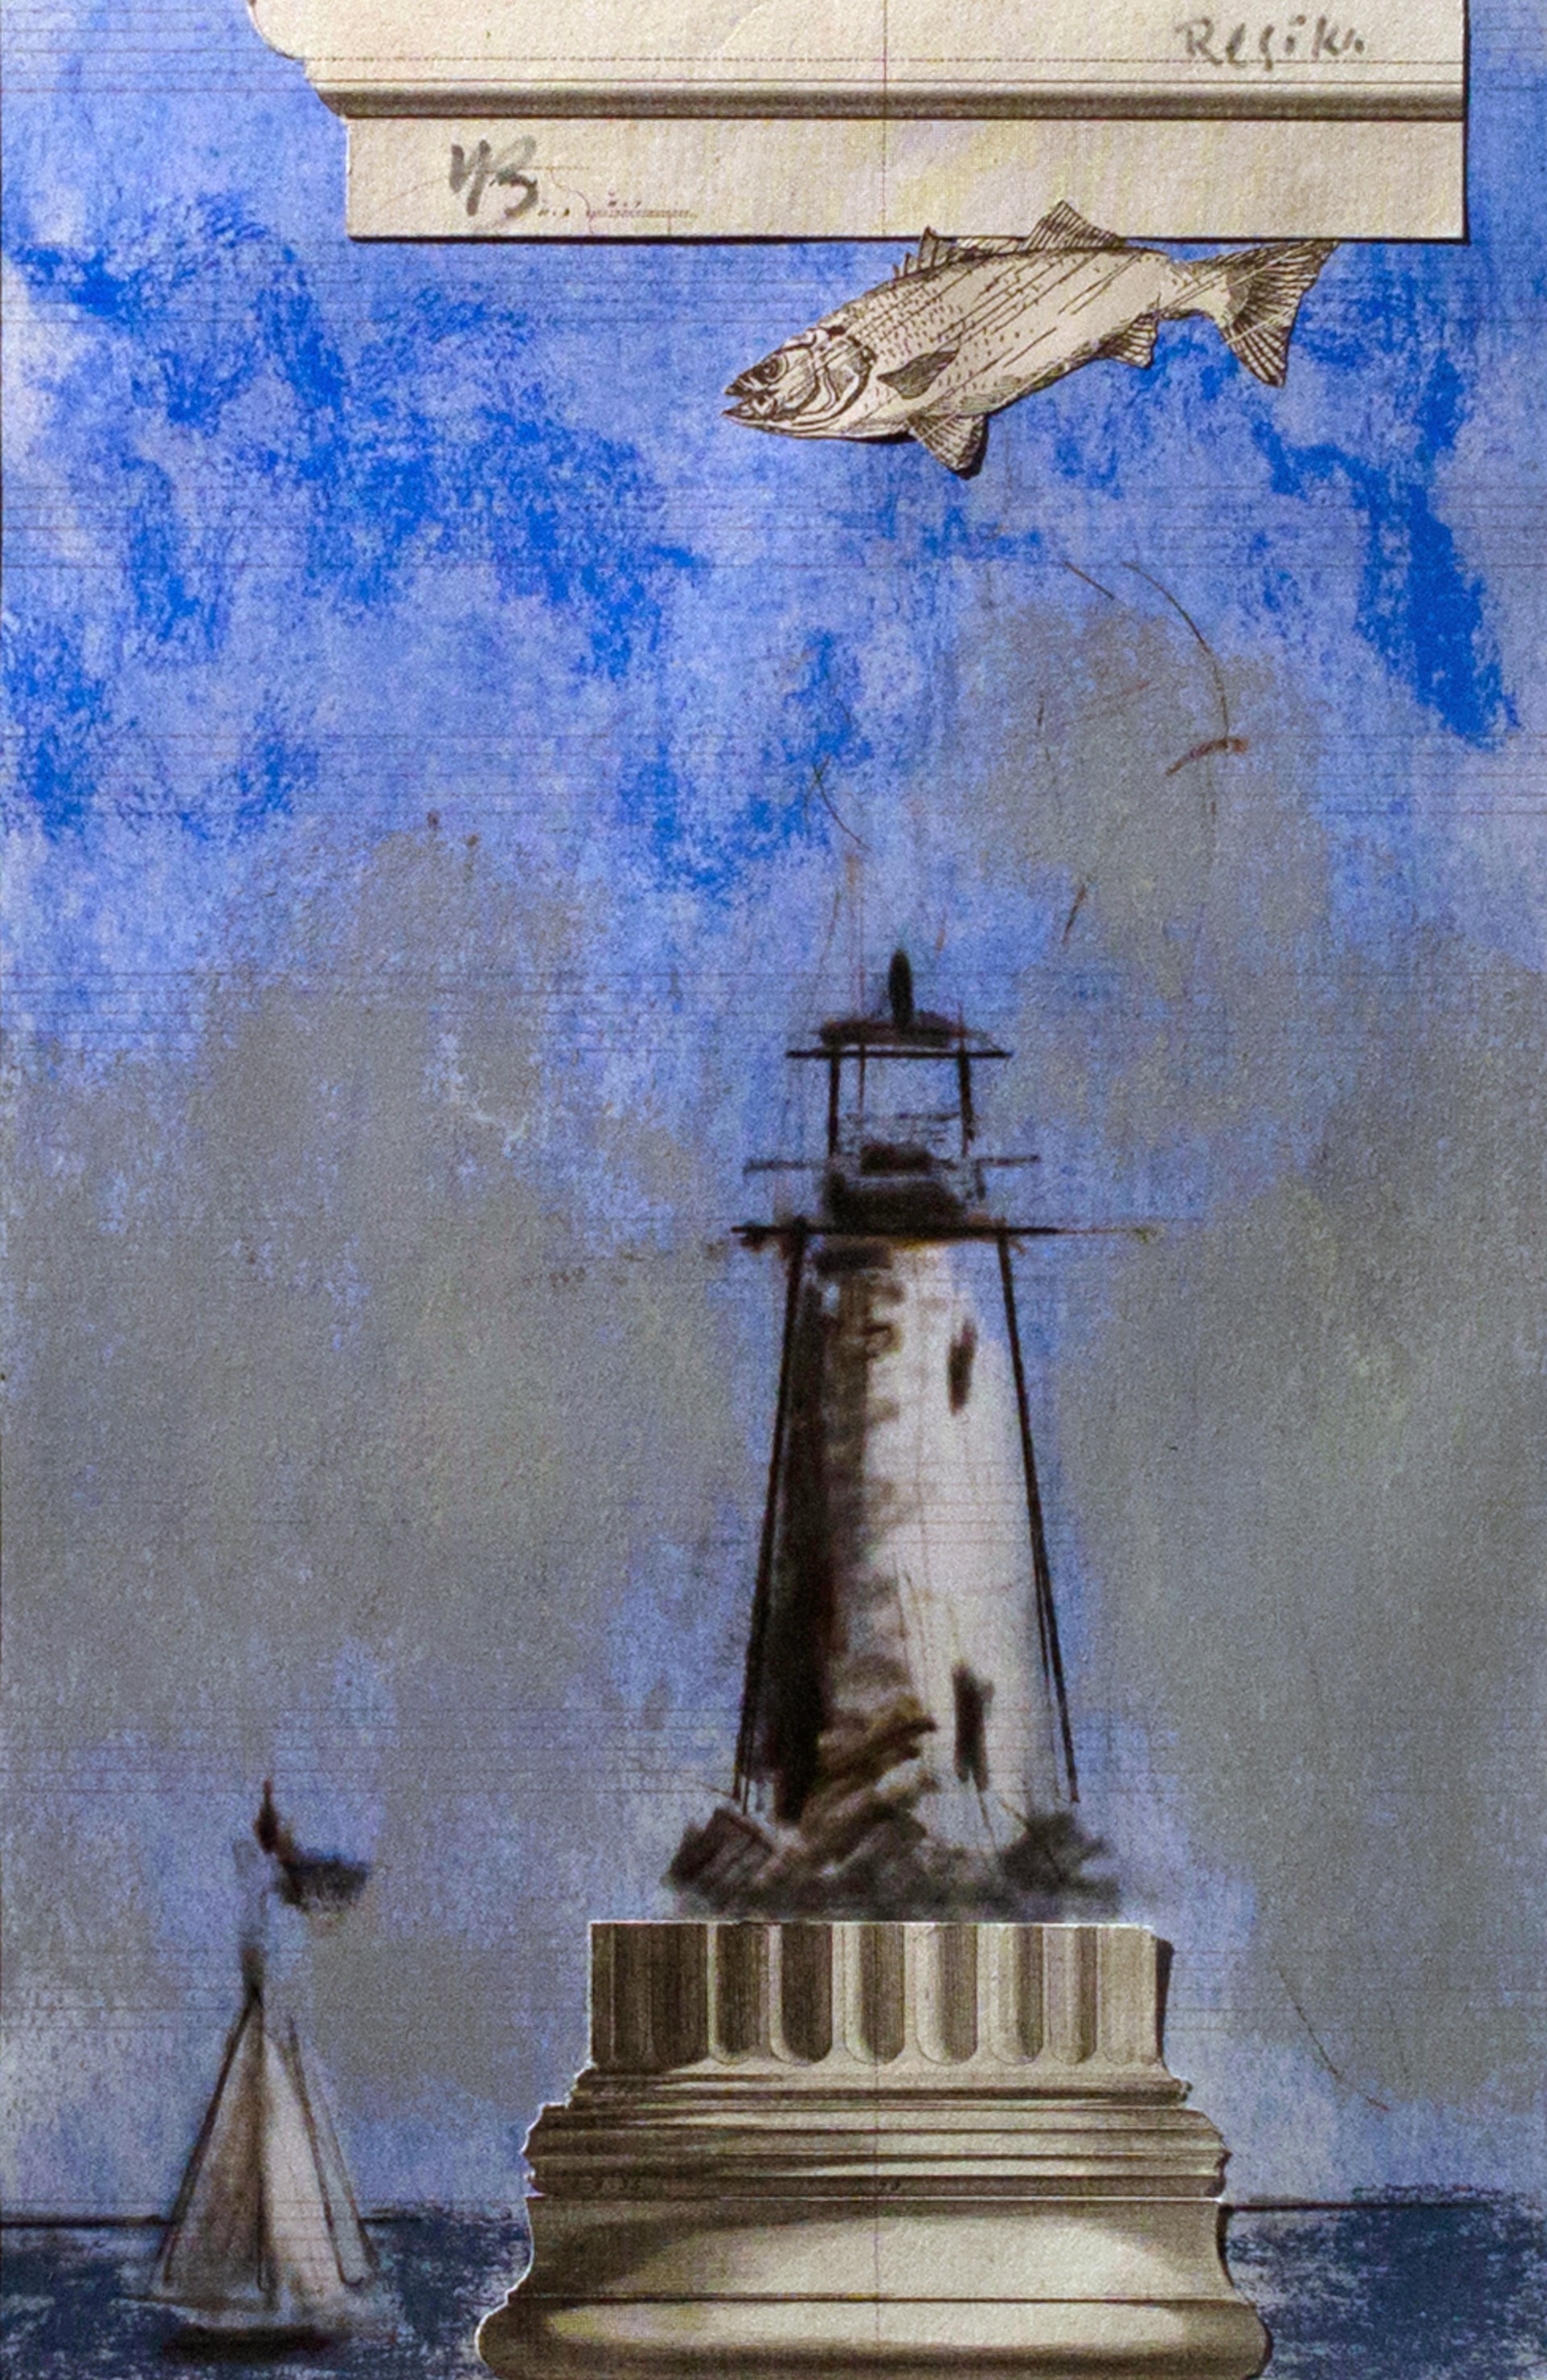 Flying over the Lighthouse by COLLABORATION Paul Resika and Varujan Boghosian